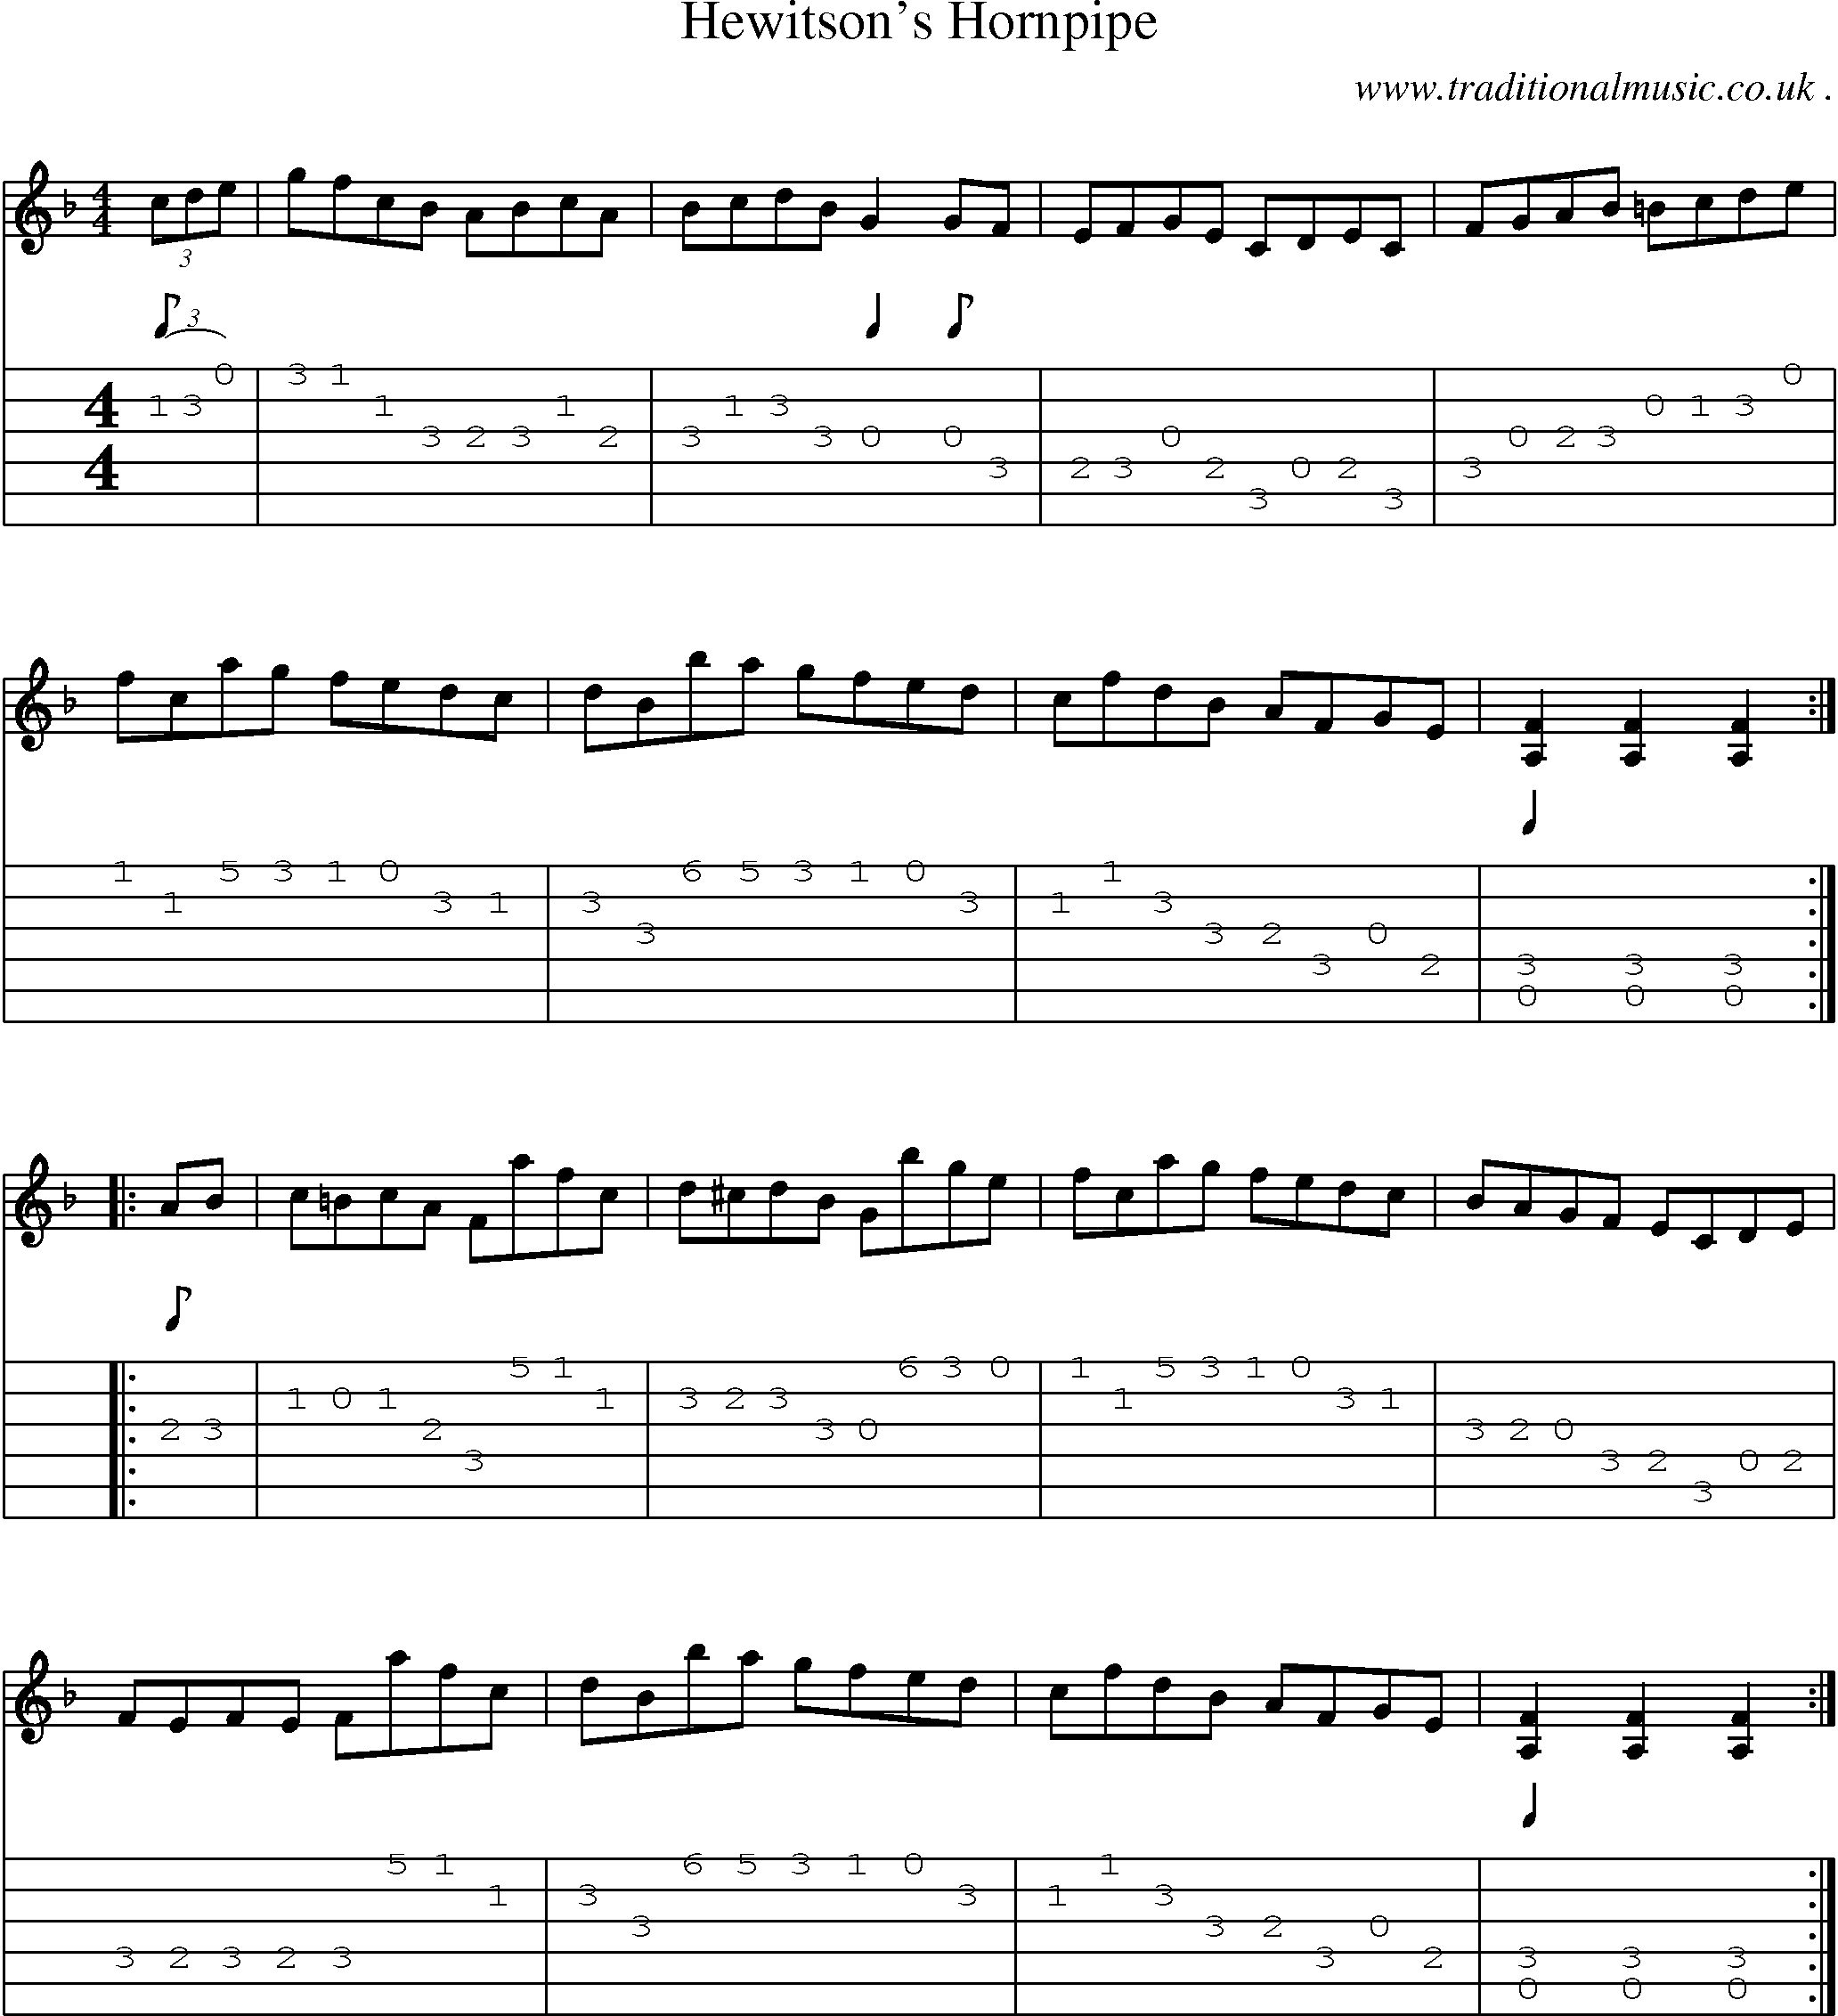 Sheet-Music and Guitar Tabs for Hewitsons Hornpipe